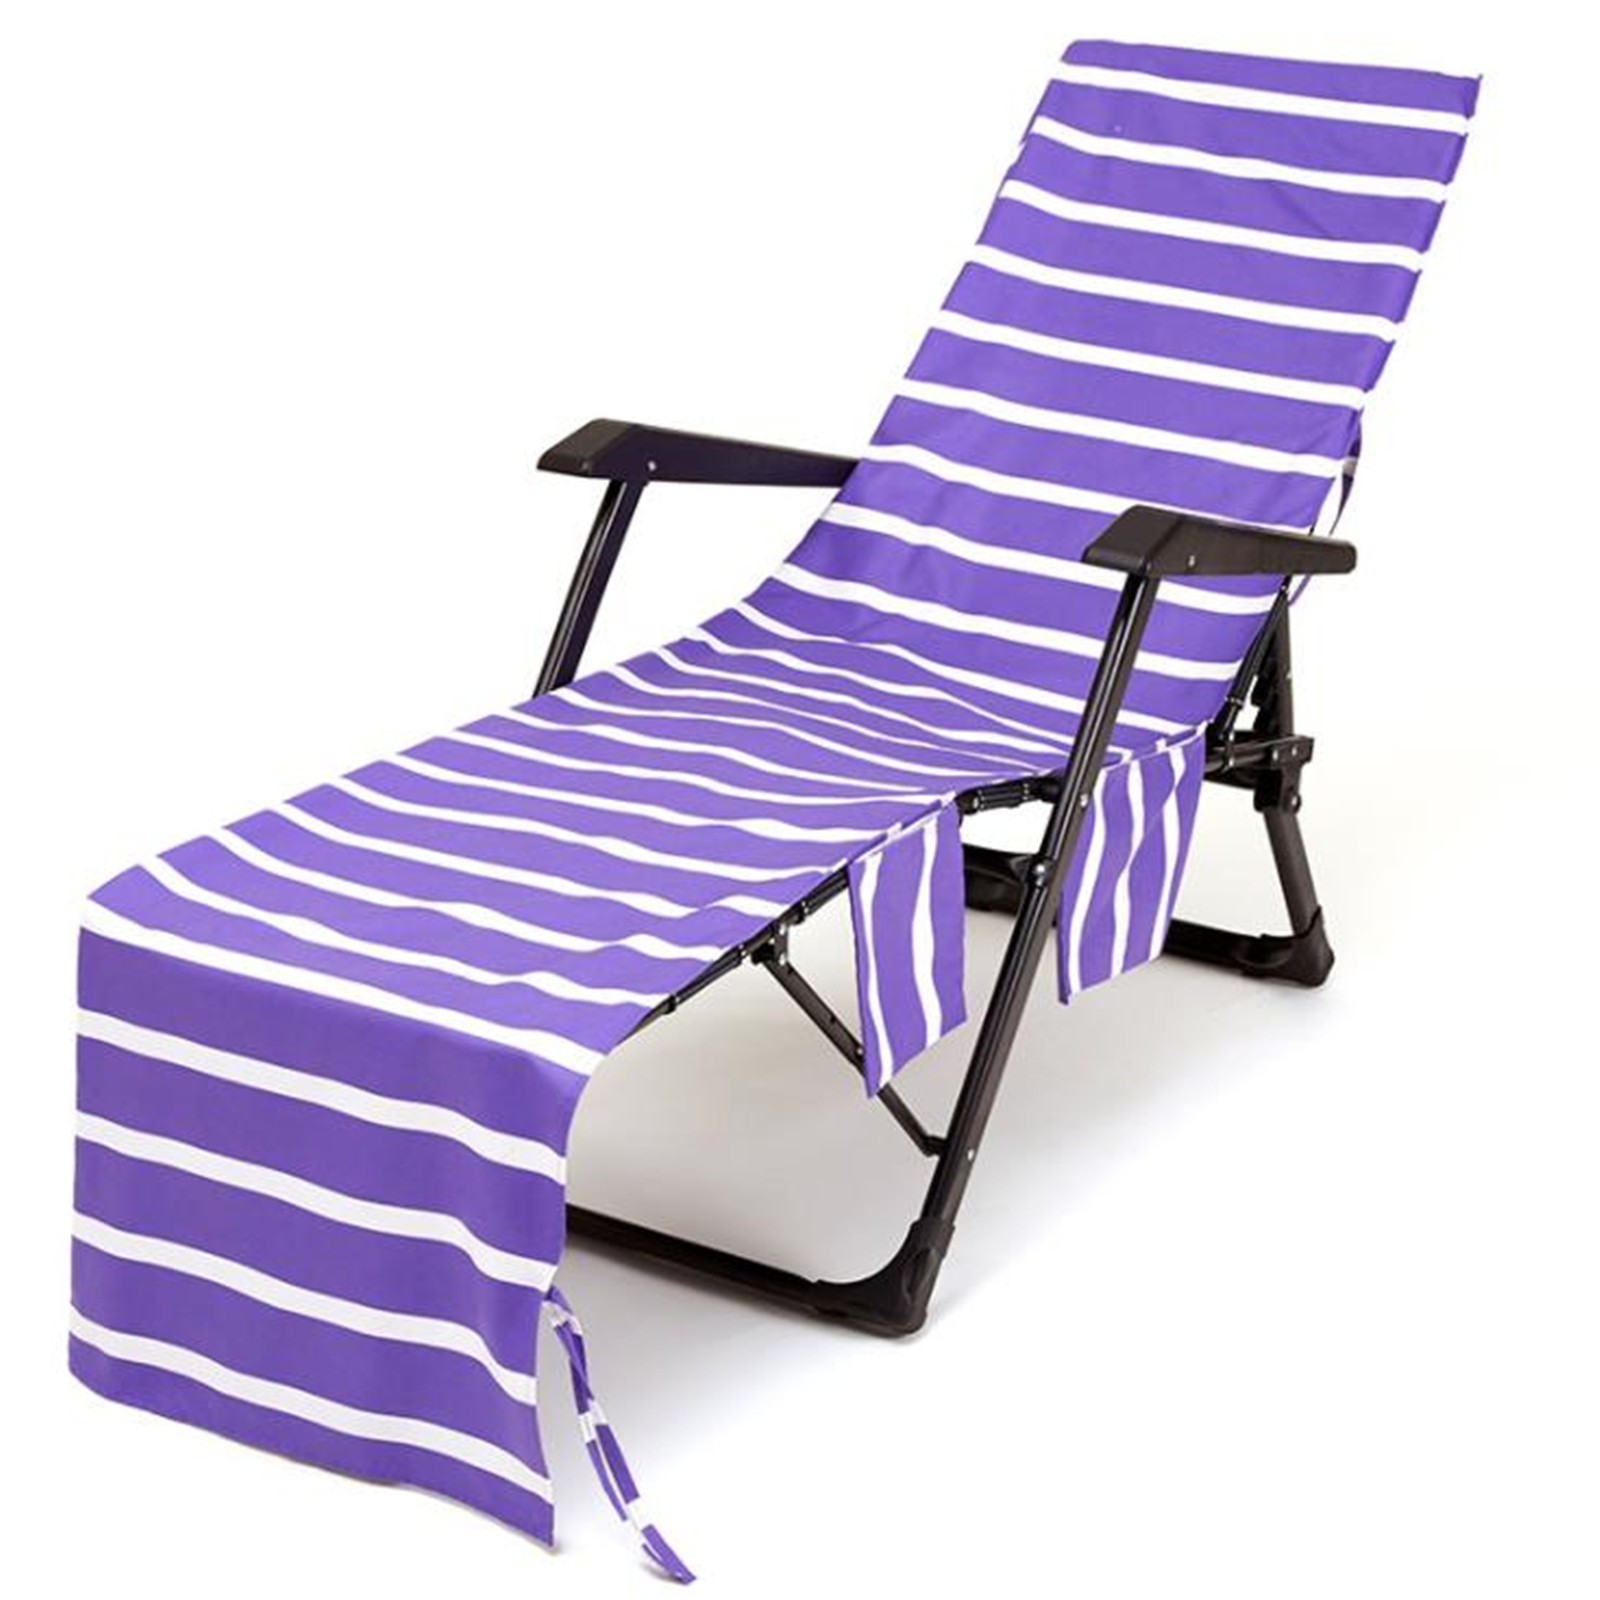 Wovilon Stripe Chair Cover Printed Beach Towel Polyester Cotton Lounge Chair Towel Striped Beach Chair Cover Printed Beach Towel - image 1 of 4